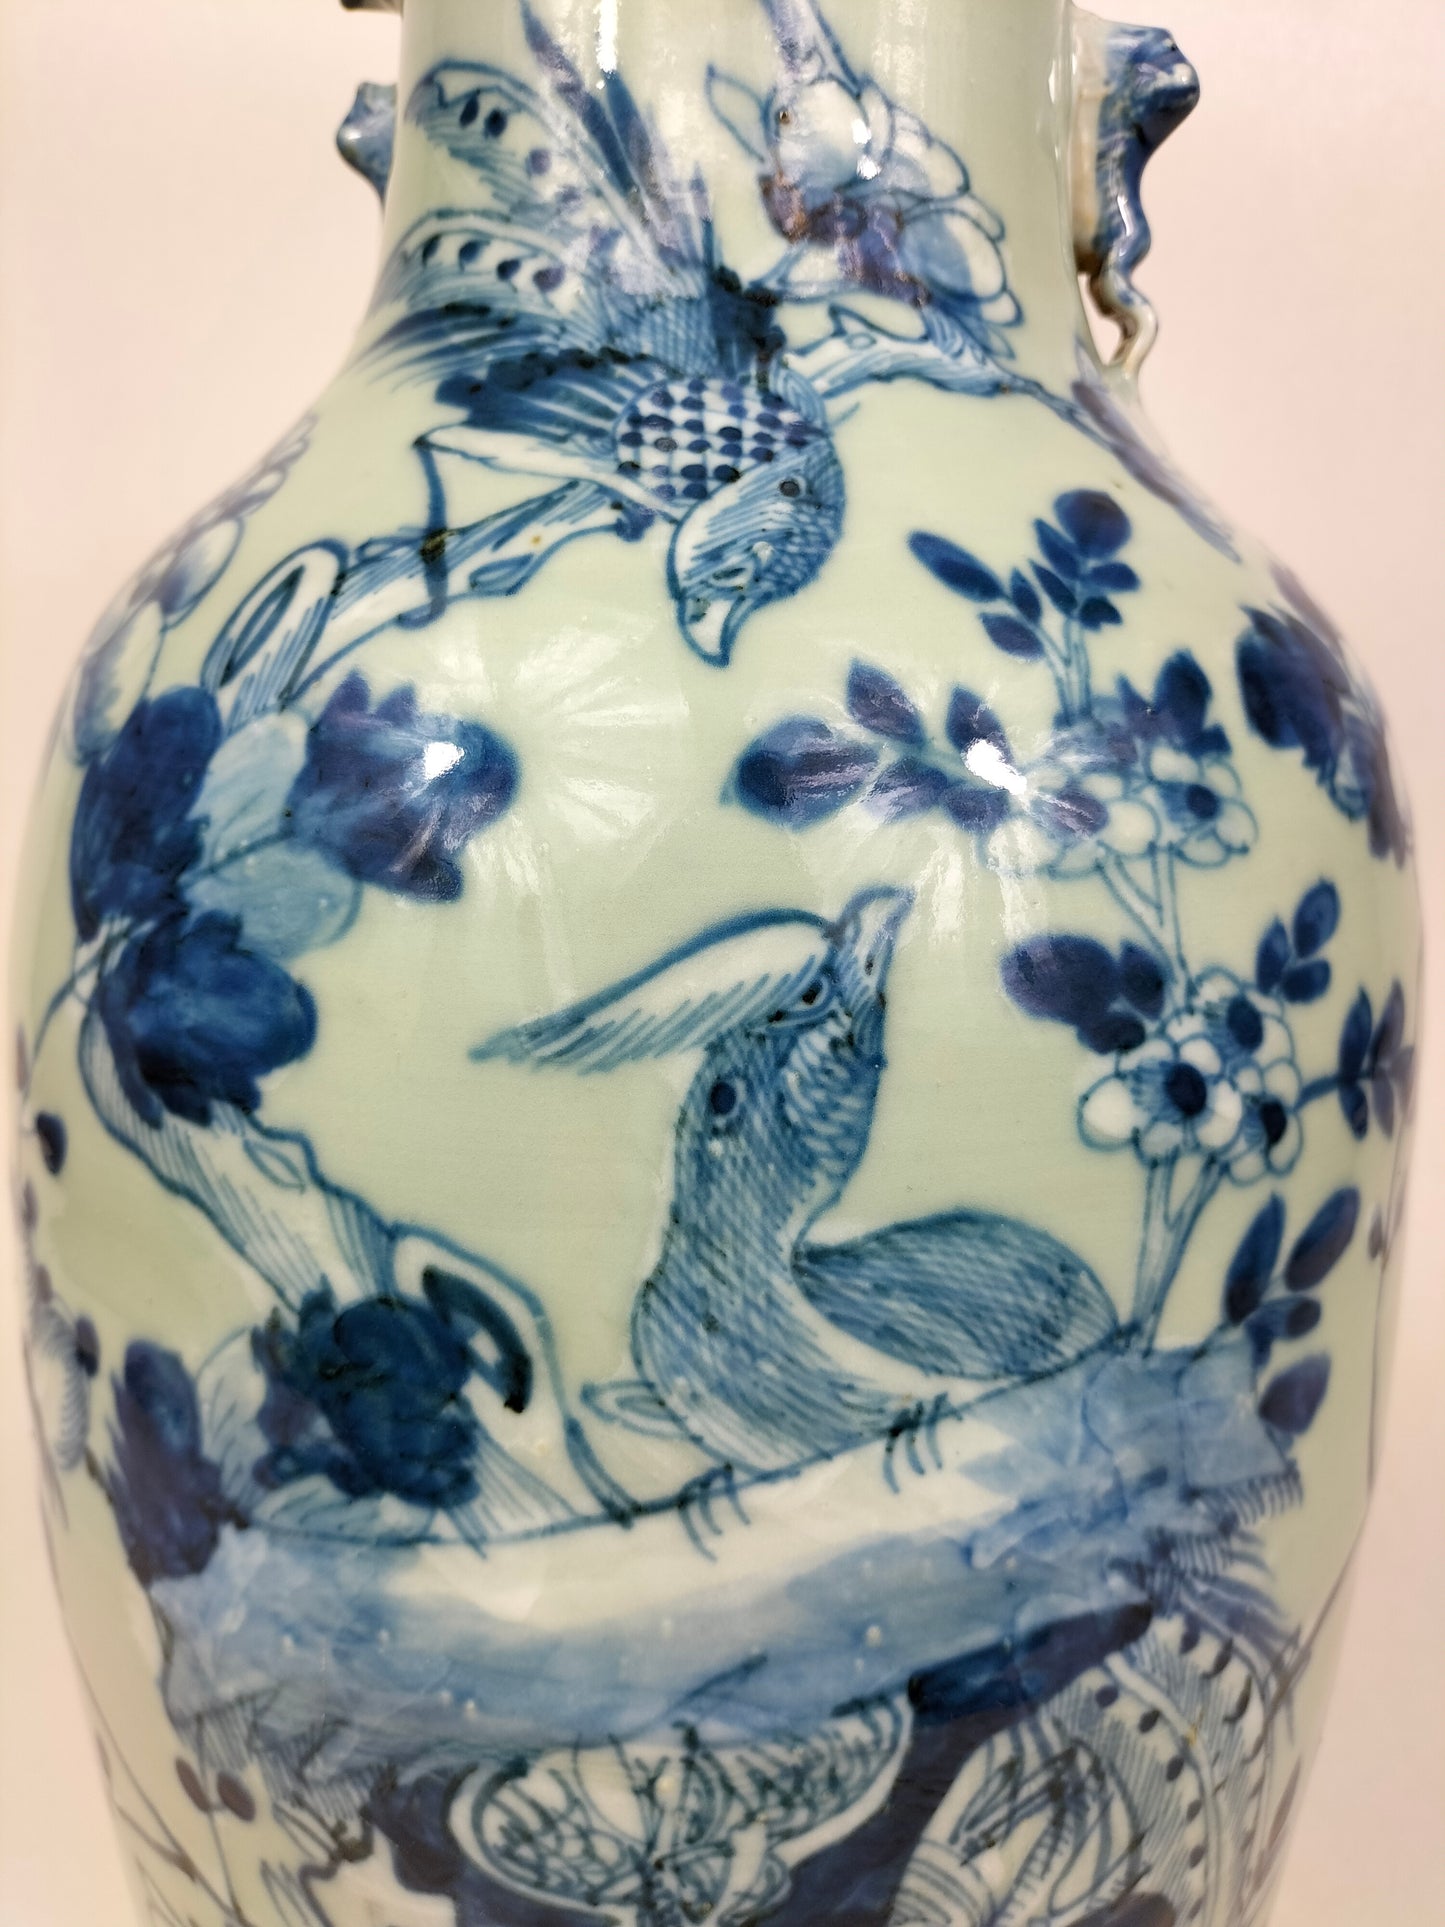 Large antique Chinese celadon vase decorated with birds and flowers // Qing Dynasty - 19th century